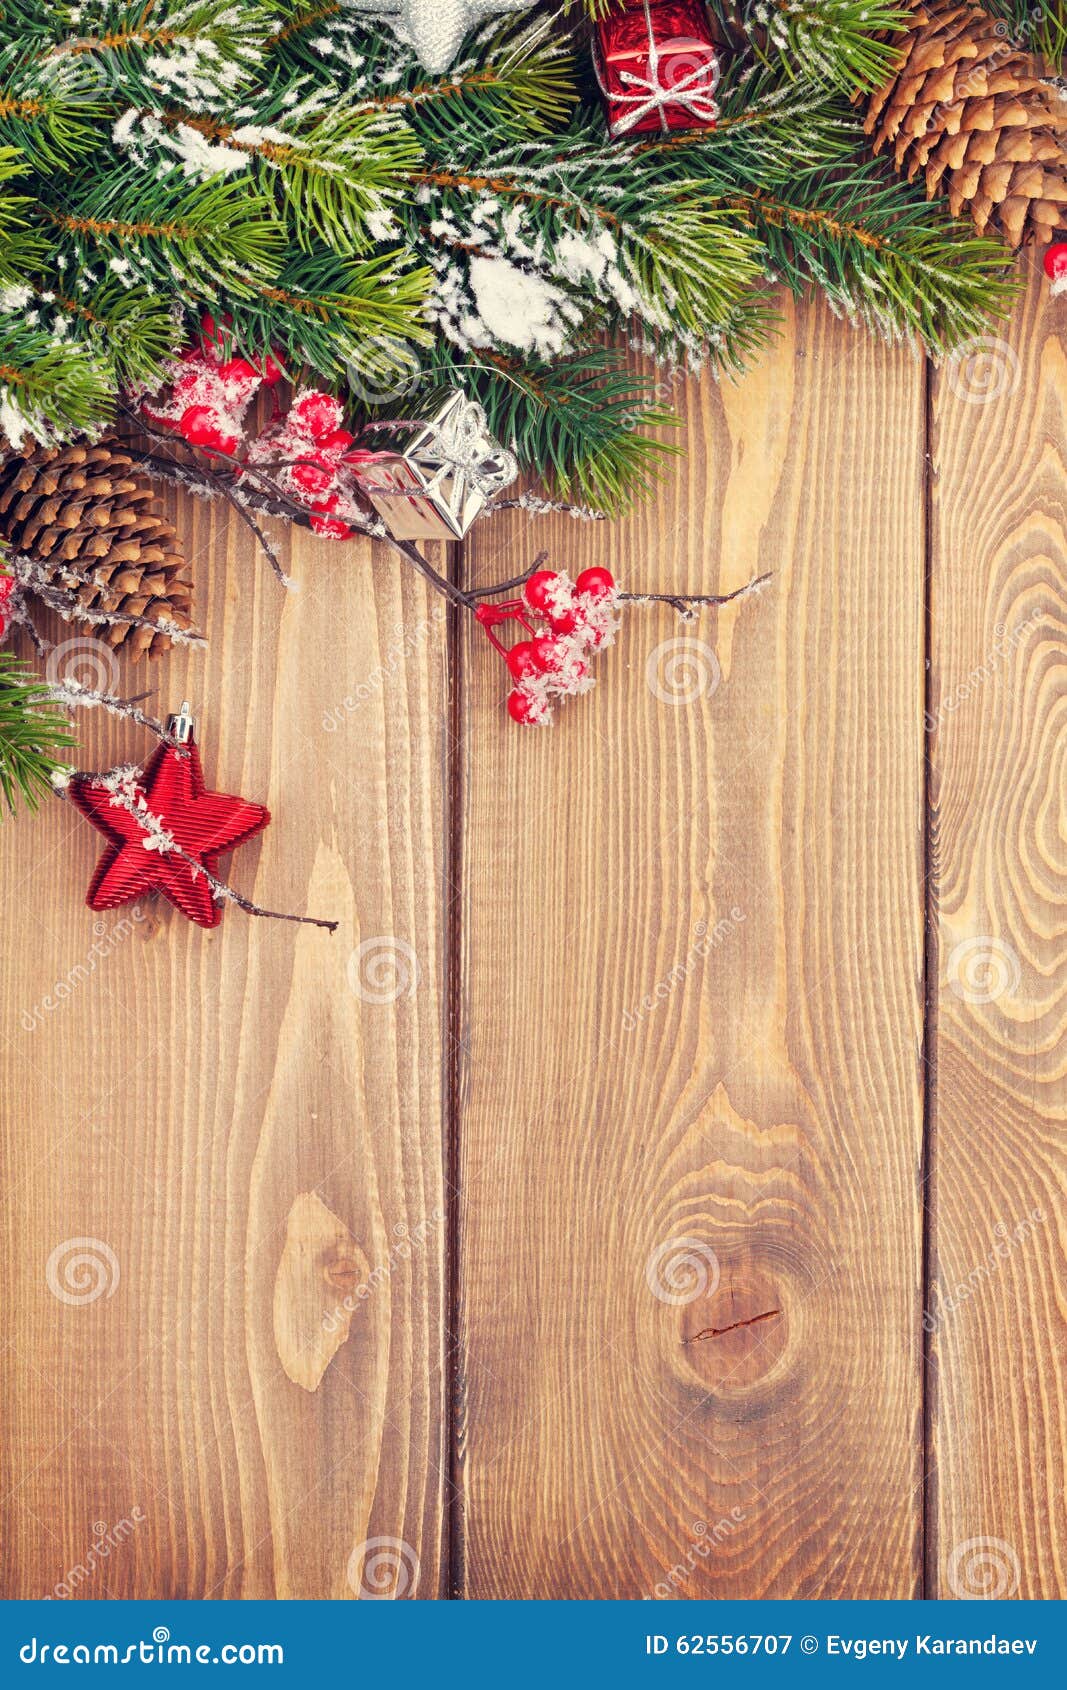 Christmas Wooden Background Stock Image - Image of retro, berry: 62556707